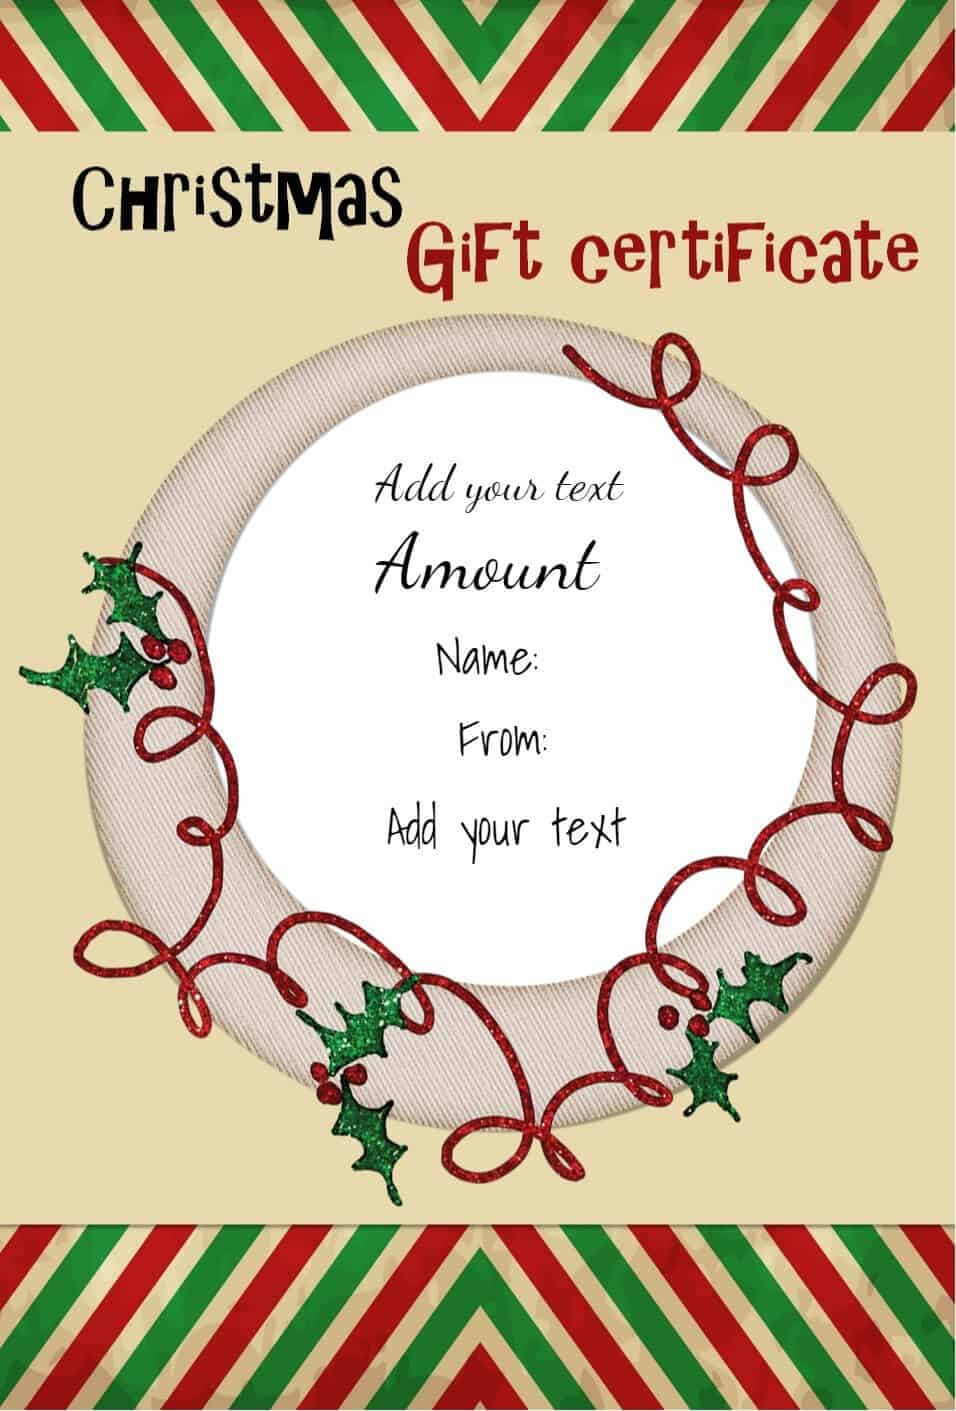 Free Christmas Gift Certificate Template | Customize Online With Regard To Free Christmas Gift Certificate Templates